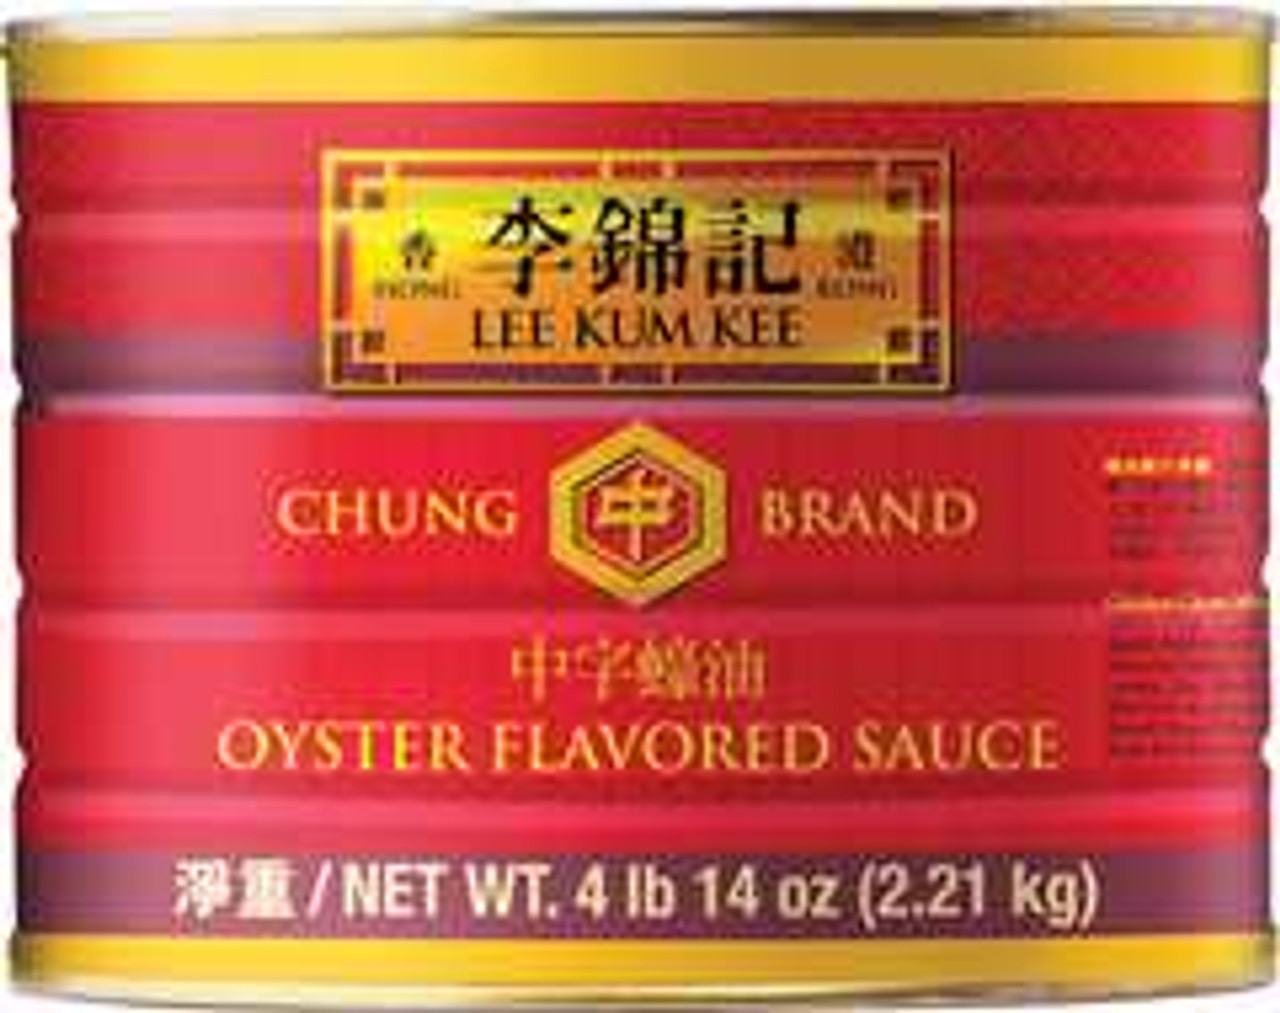 LEE KUM KEE Lee Kum Kee Chung Brand 4 lb. 14 oz. Oyster Flavored Sauce - 6/Case - Elevate Your Dishes with Authentic Flavor